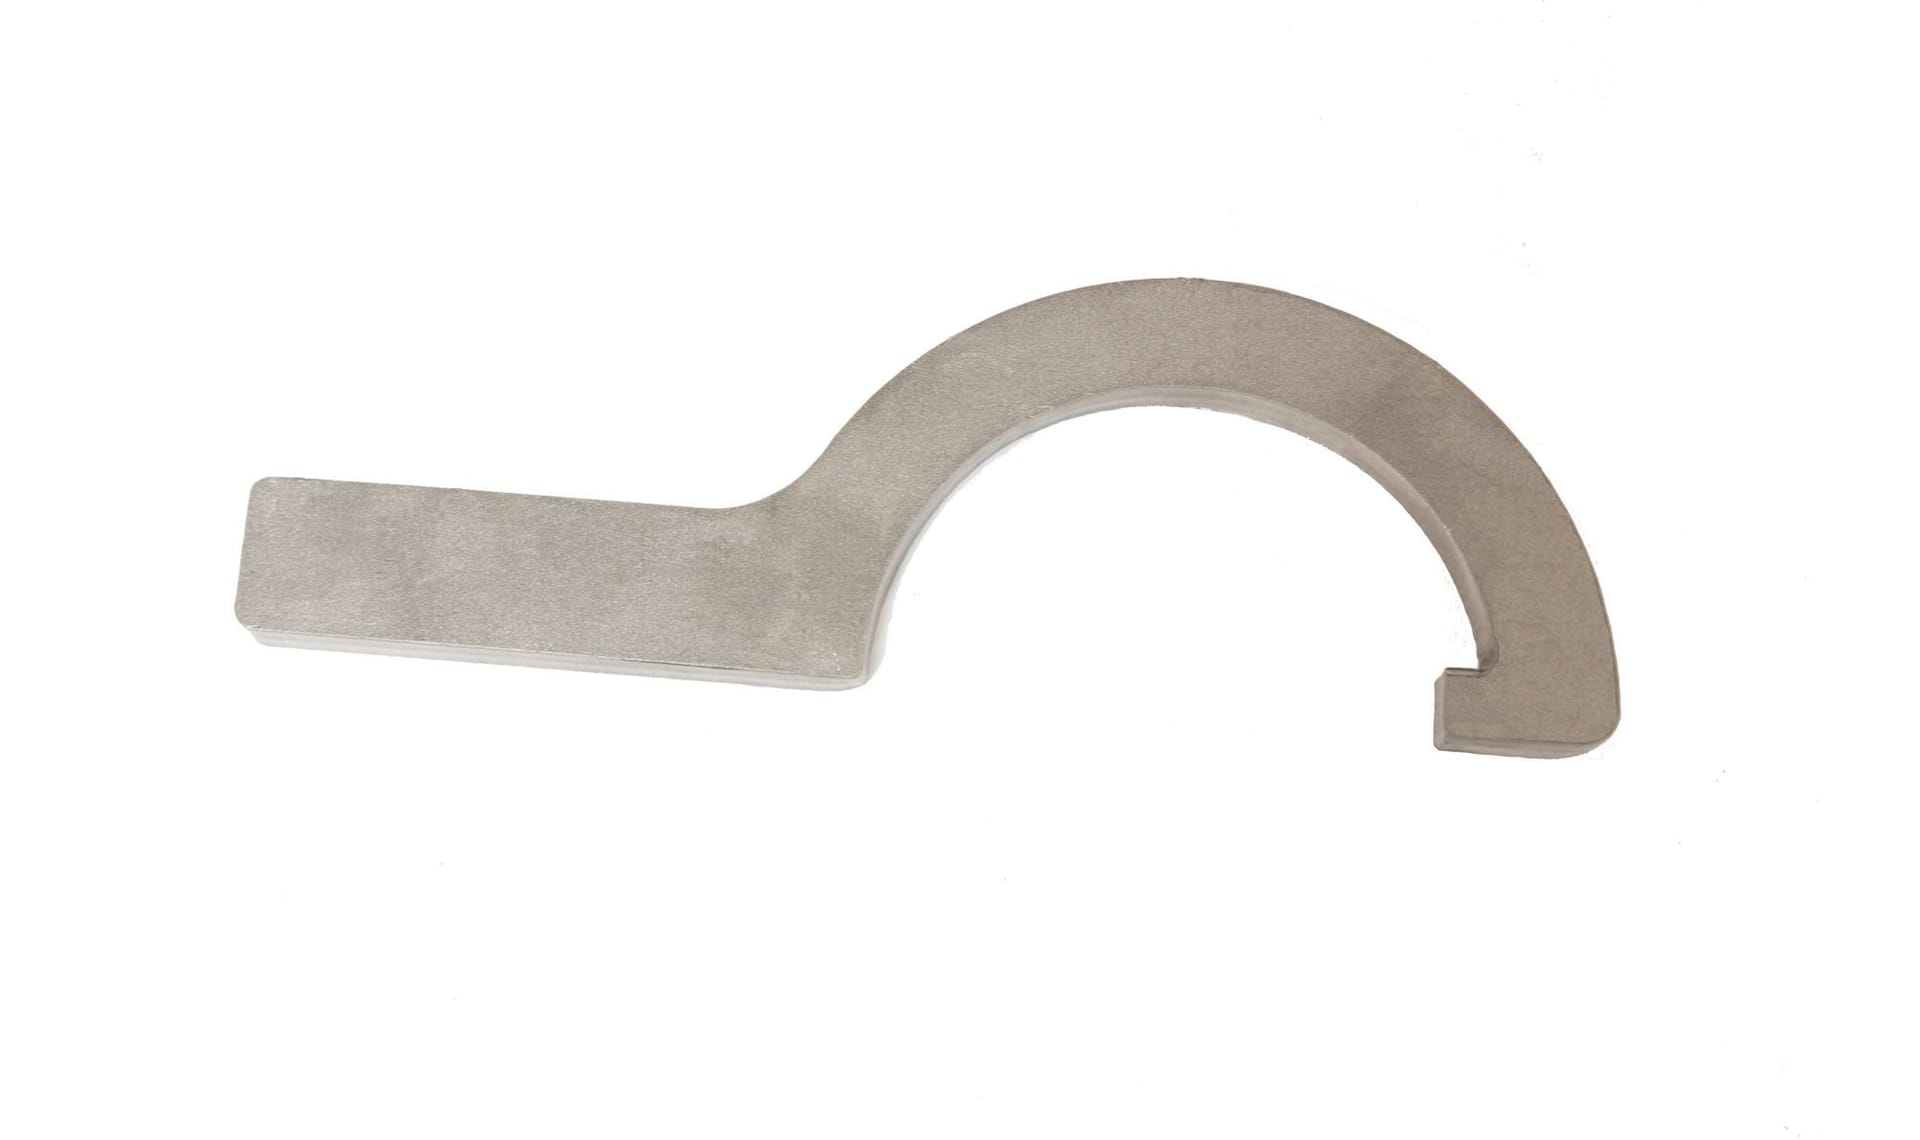 Andersen Ranch Hitch Adapter Spanner Wrench Tool